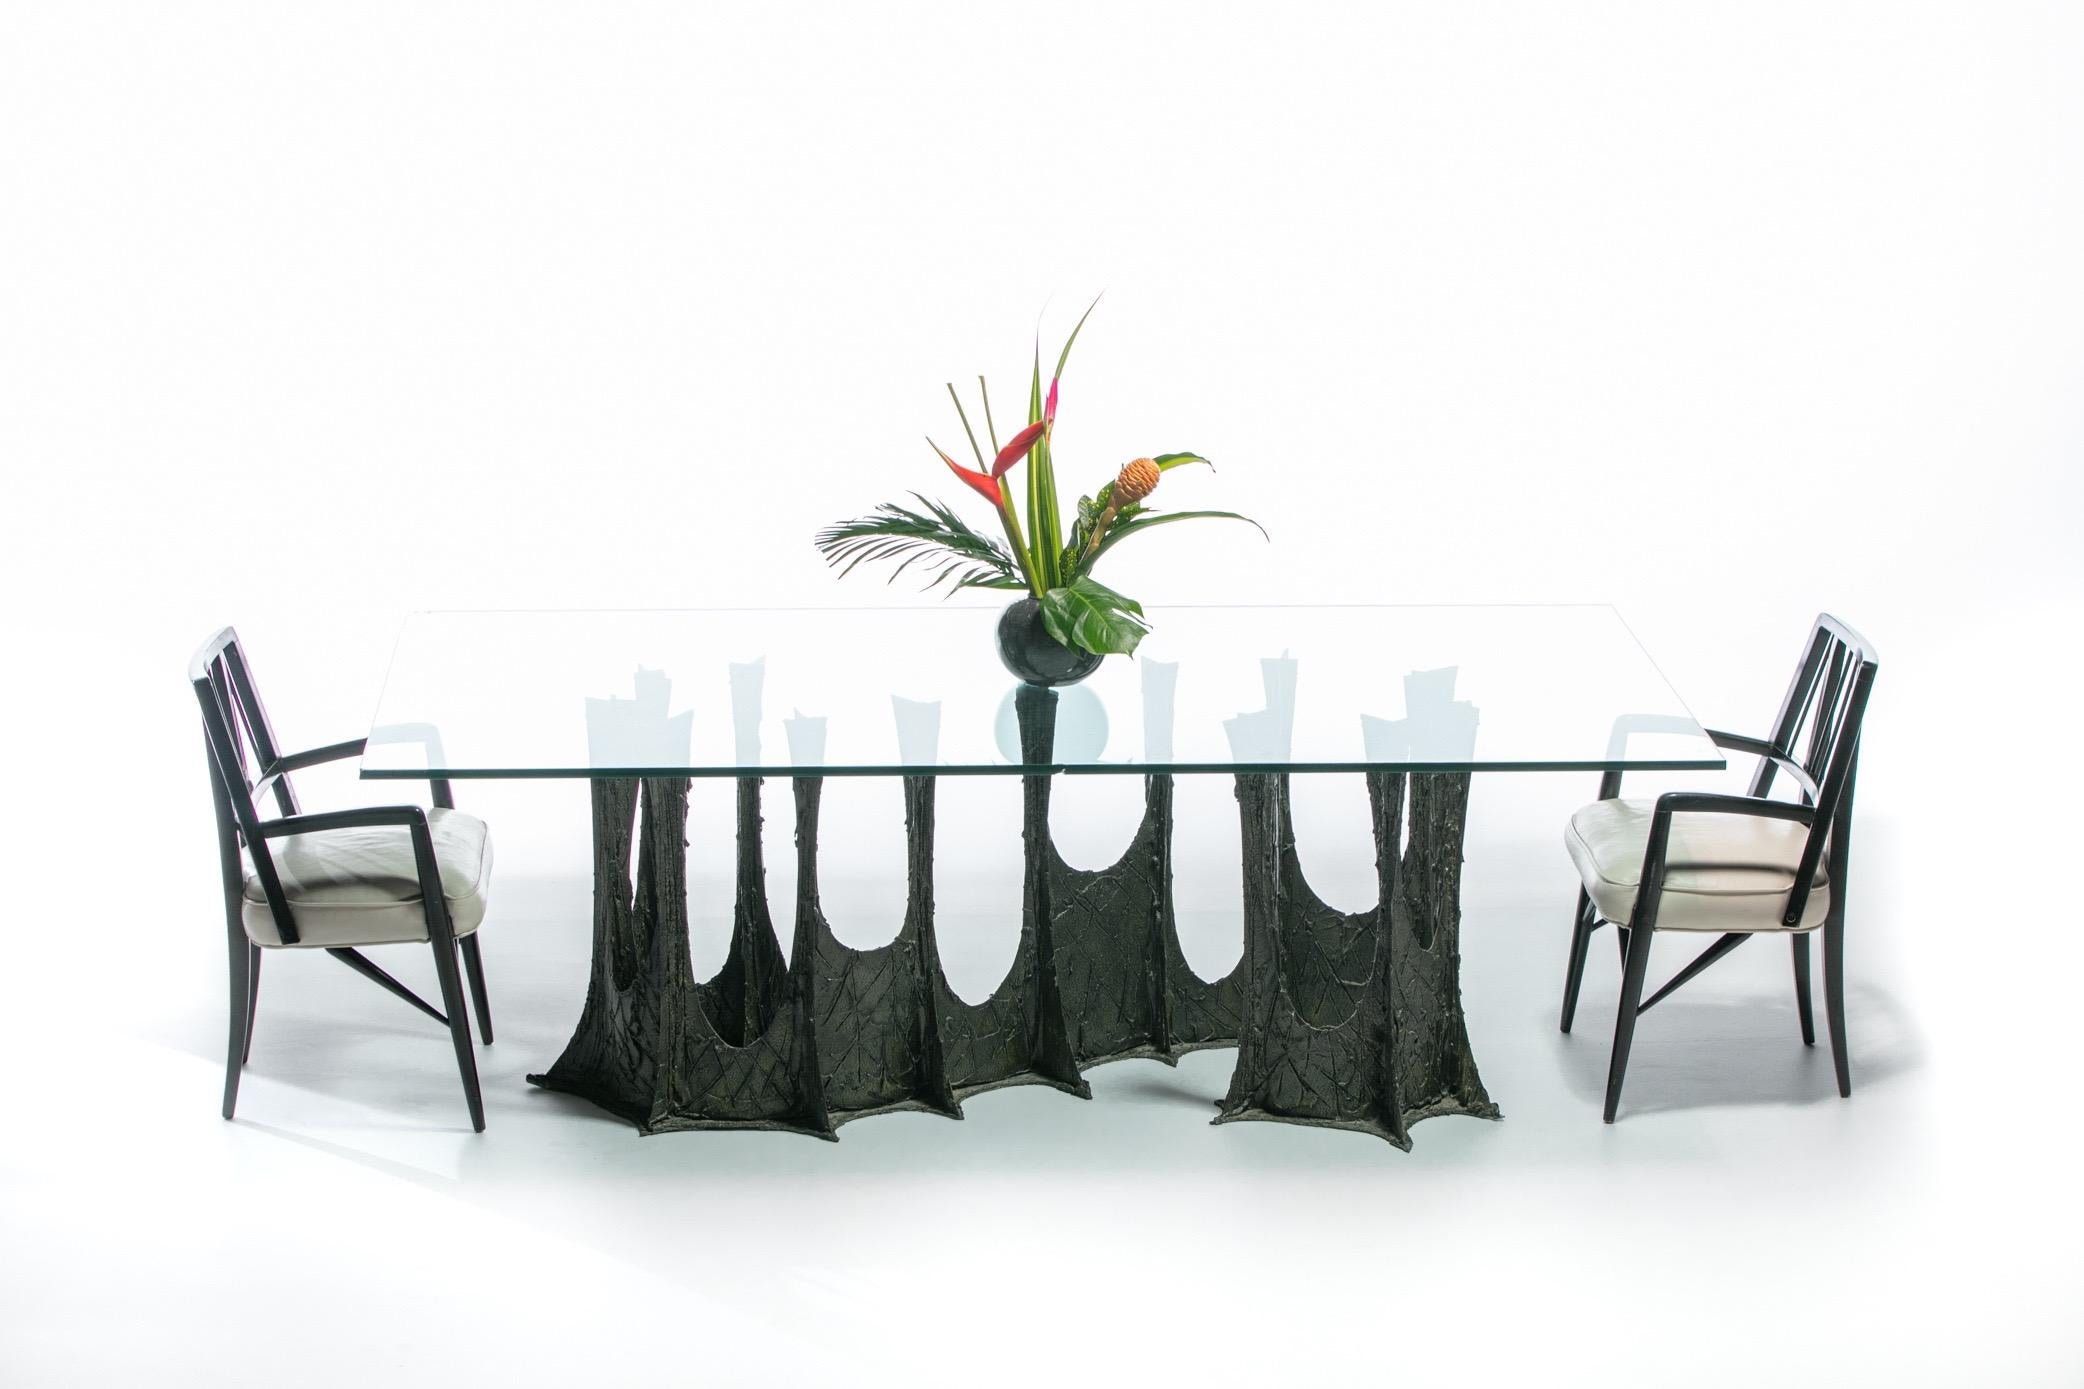 Paul Evans Brutalist Stalagmite dining table Model No. PE102 made of bronze composite designed for Directional. Signed and dated P.E. '74. Furniture that truly is art, Paul Evans transforms bronze composite into tall and strong Brutalist shapes that